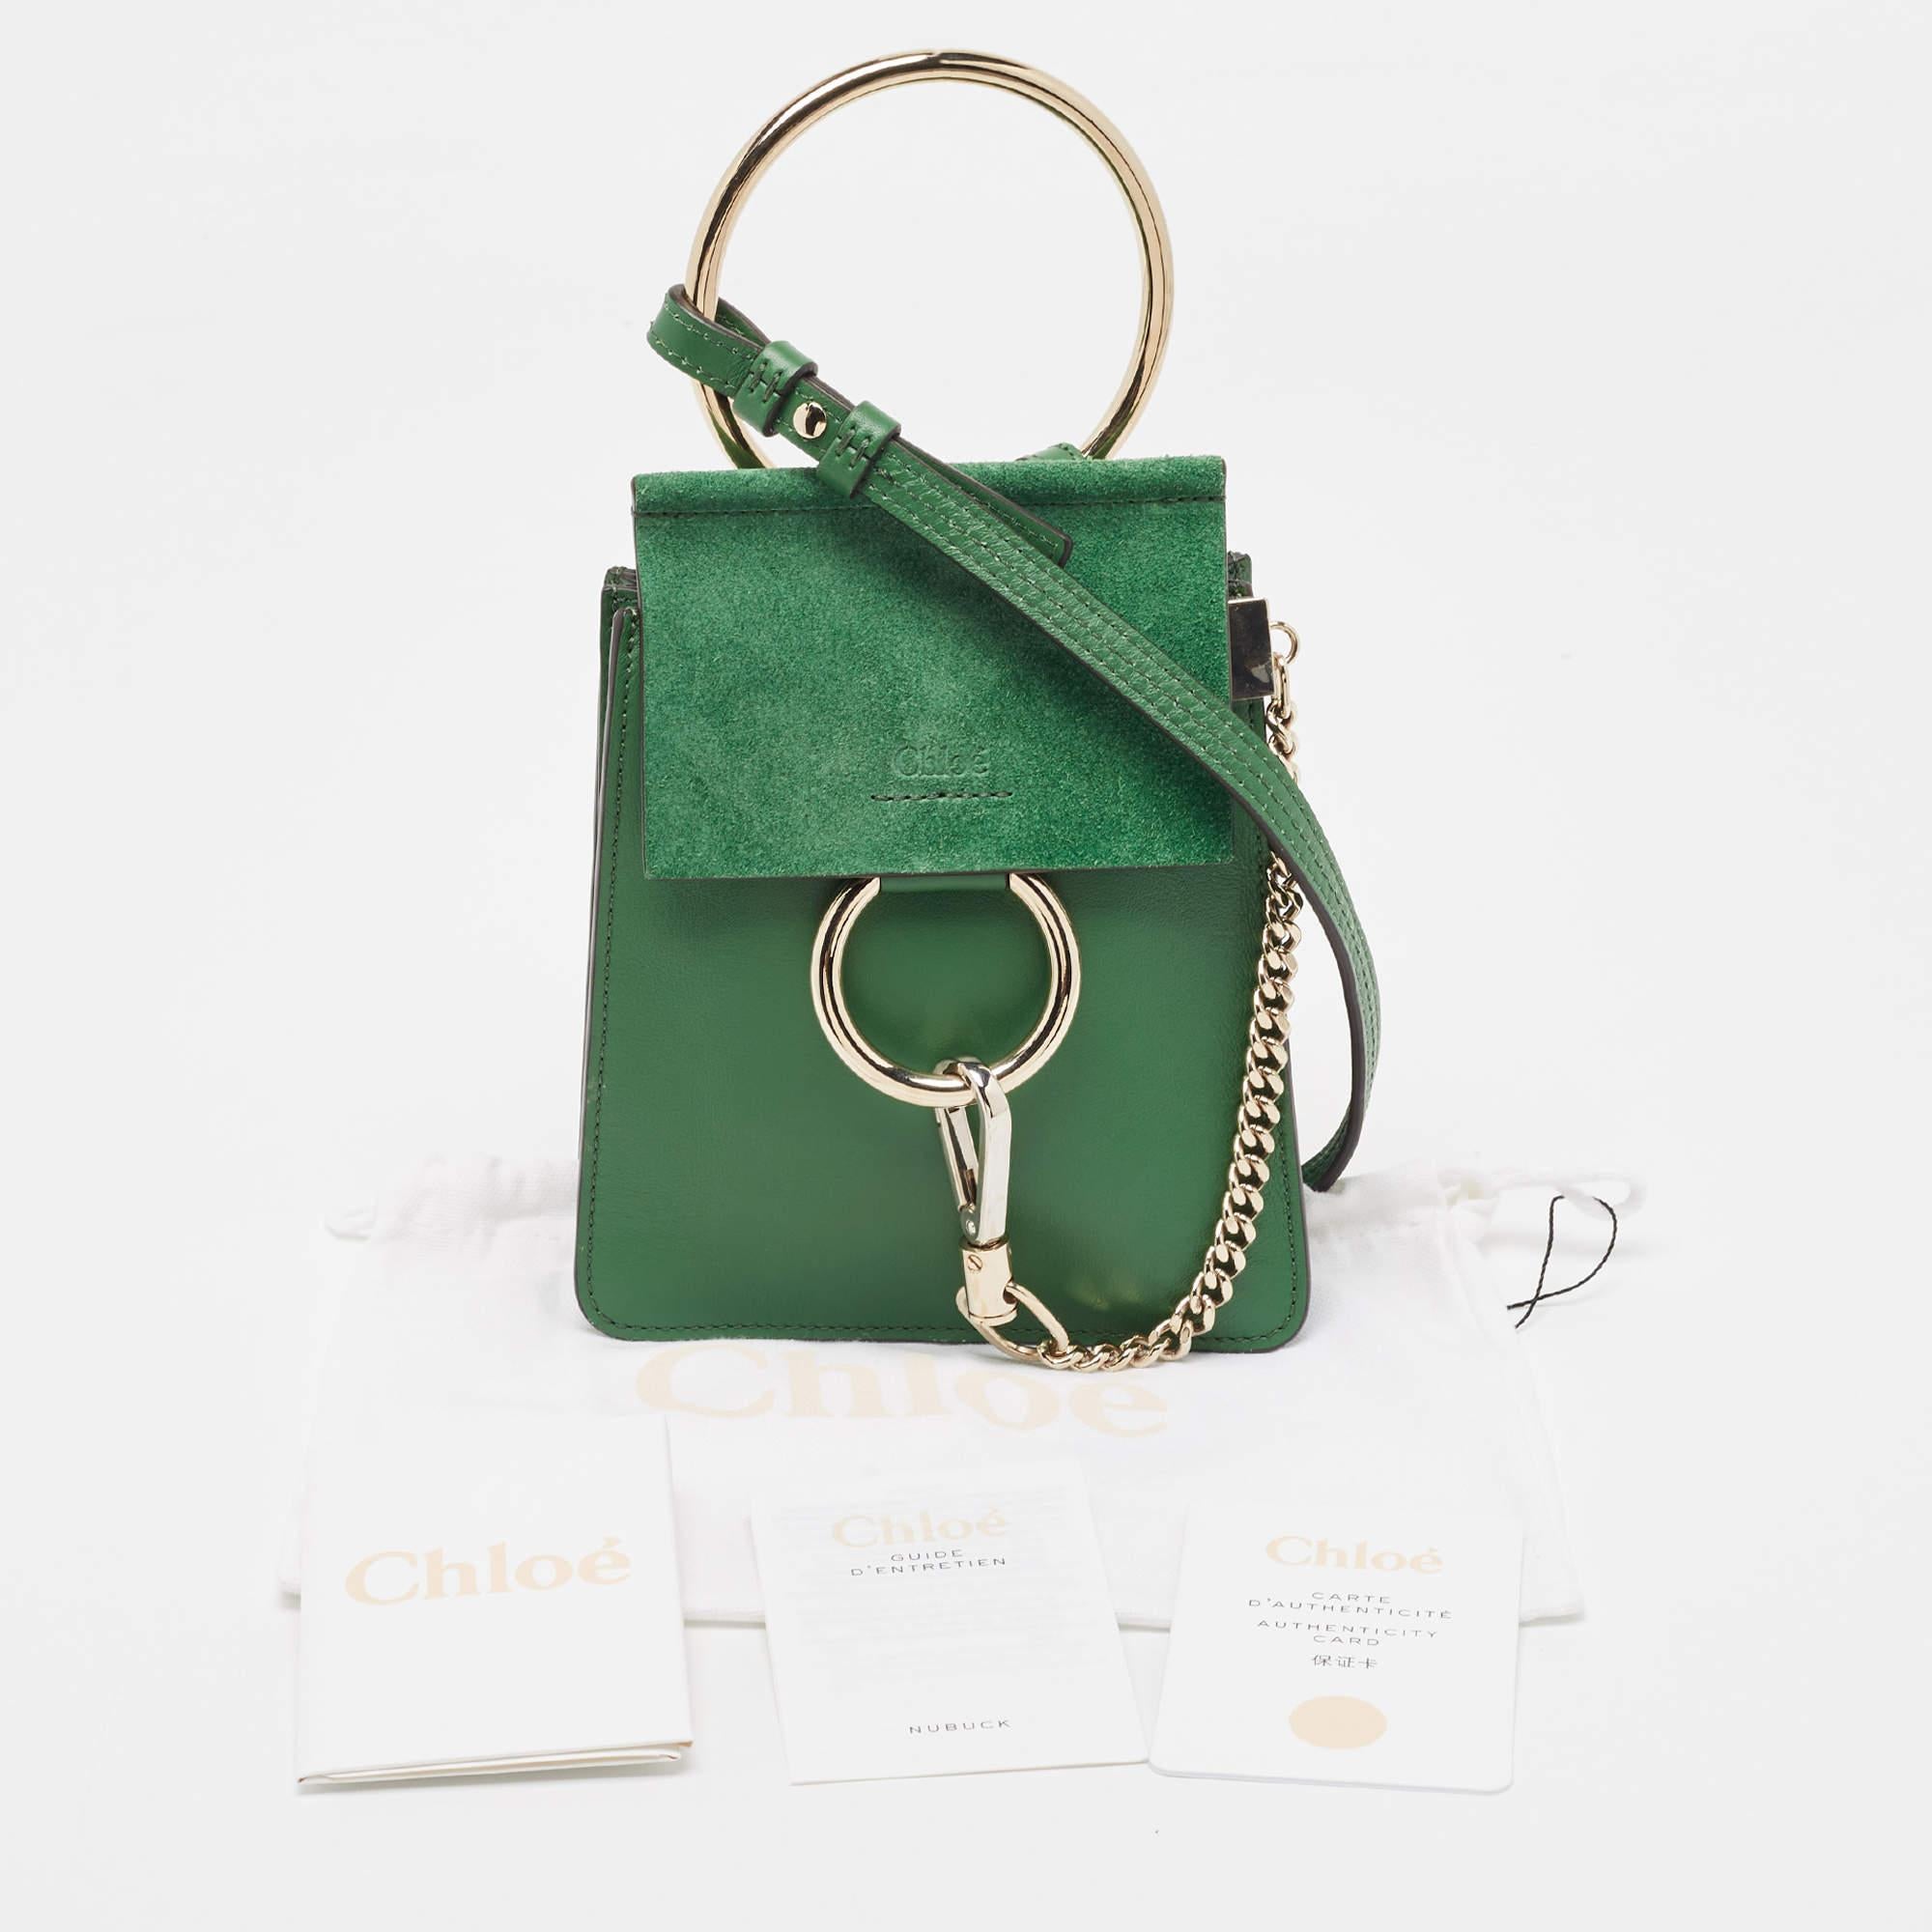 Chloé Green Leather and Suede Mini Faye Crossbody Bag 8